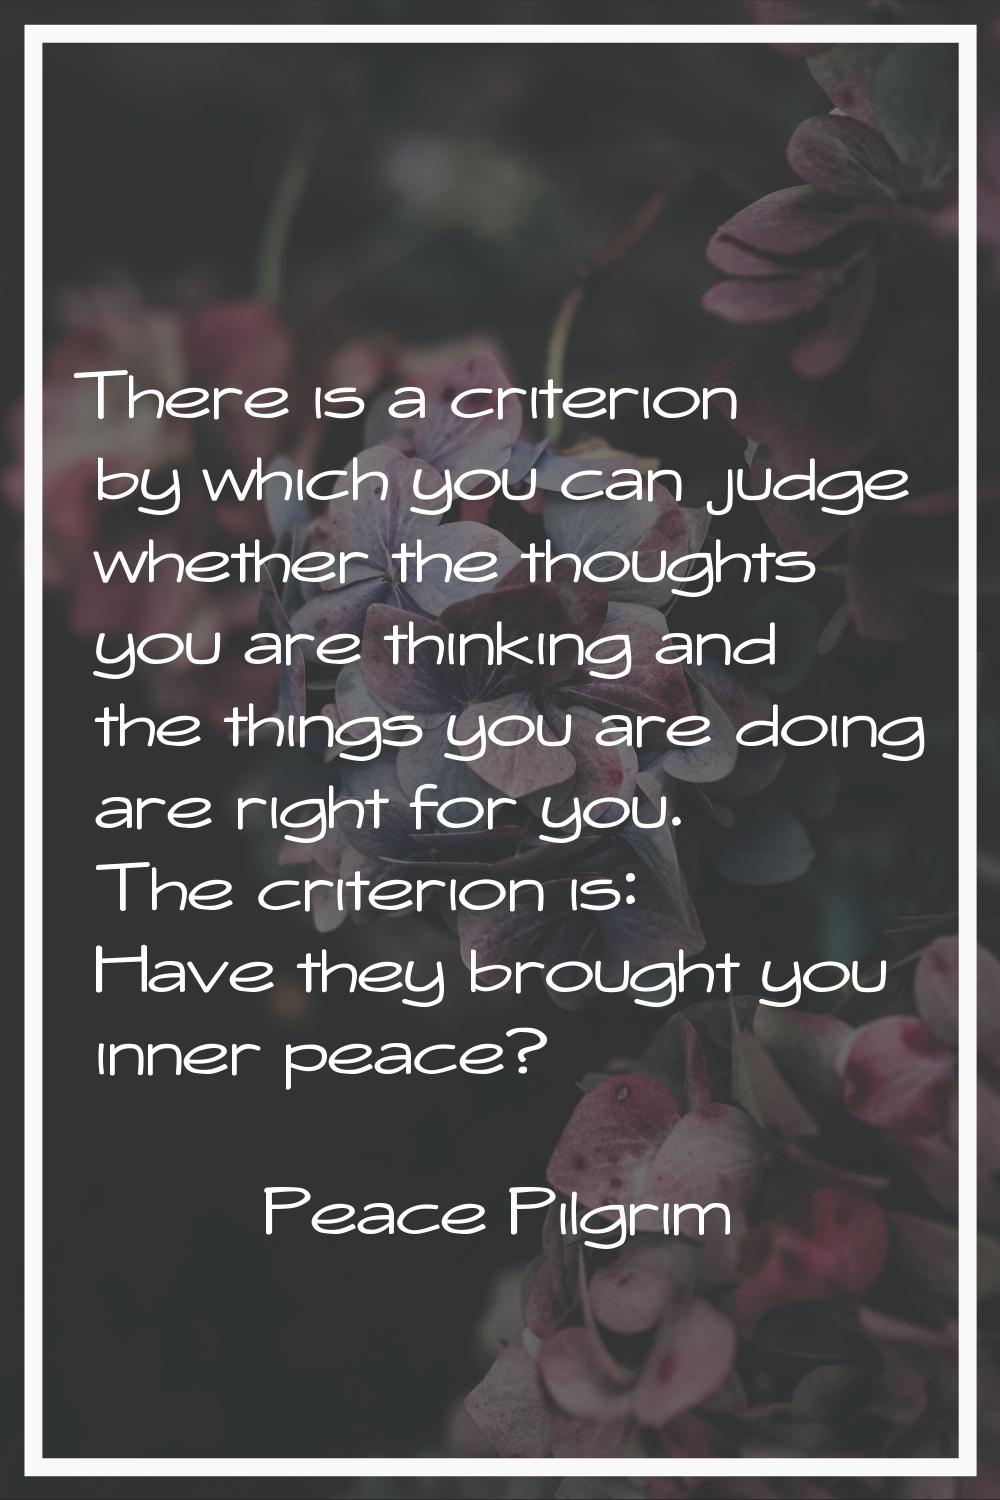 There is a criterion by which you can judge whether the thoughts you are thinking and the things yo